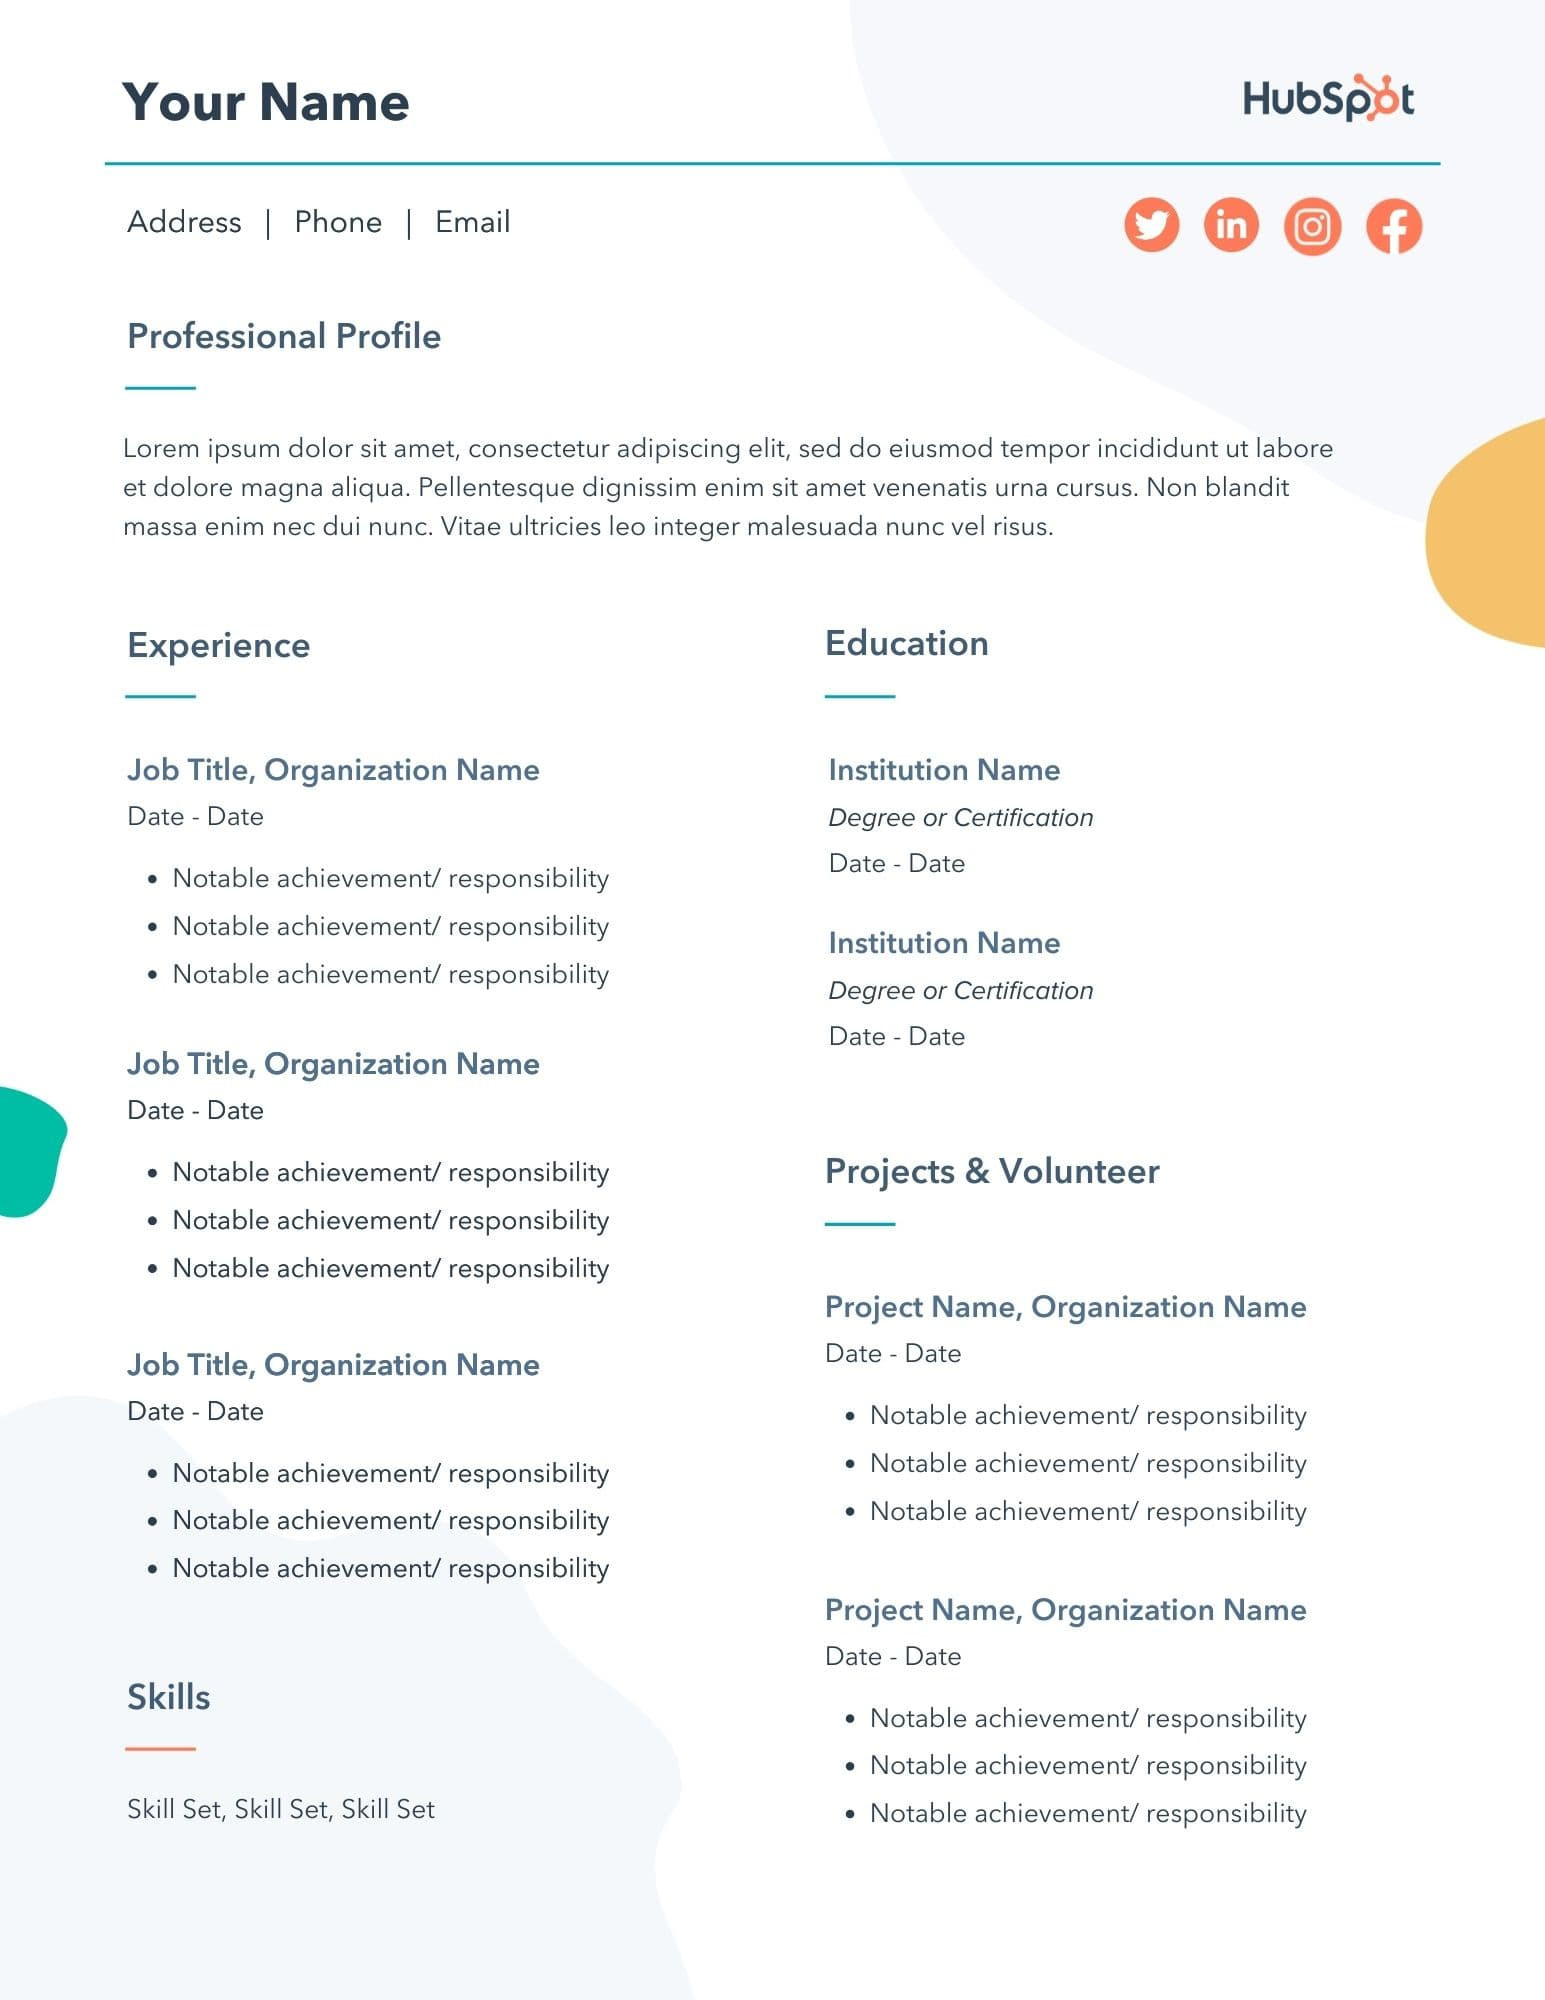 Resume Template for someone who Has Never Worked 29 Free Resume Templates for Microsoft Word (& How to Make Your Own)